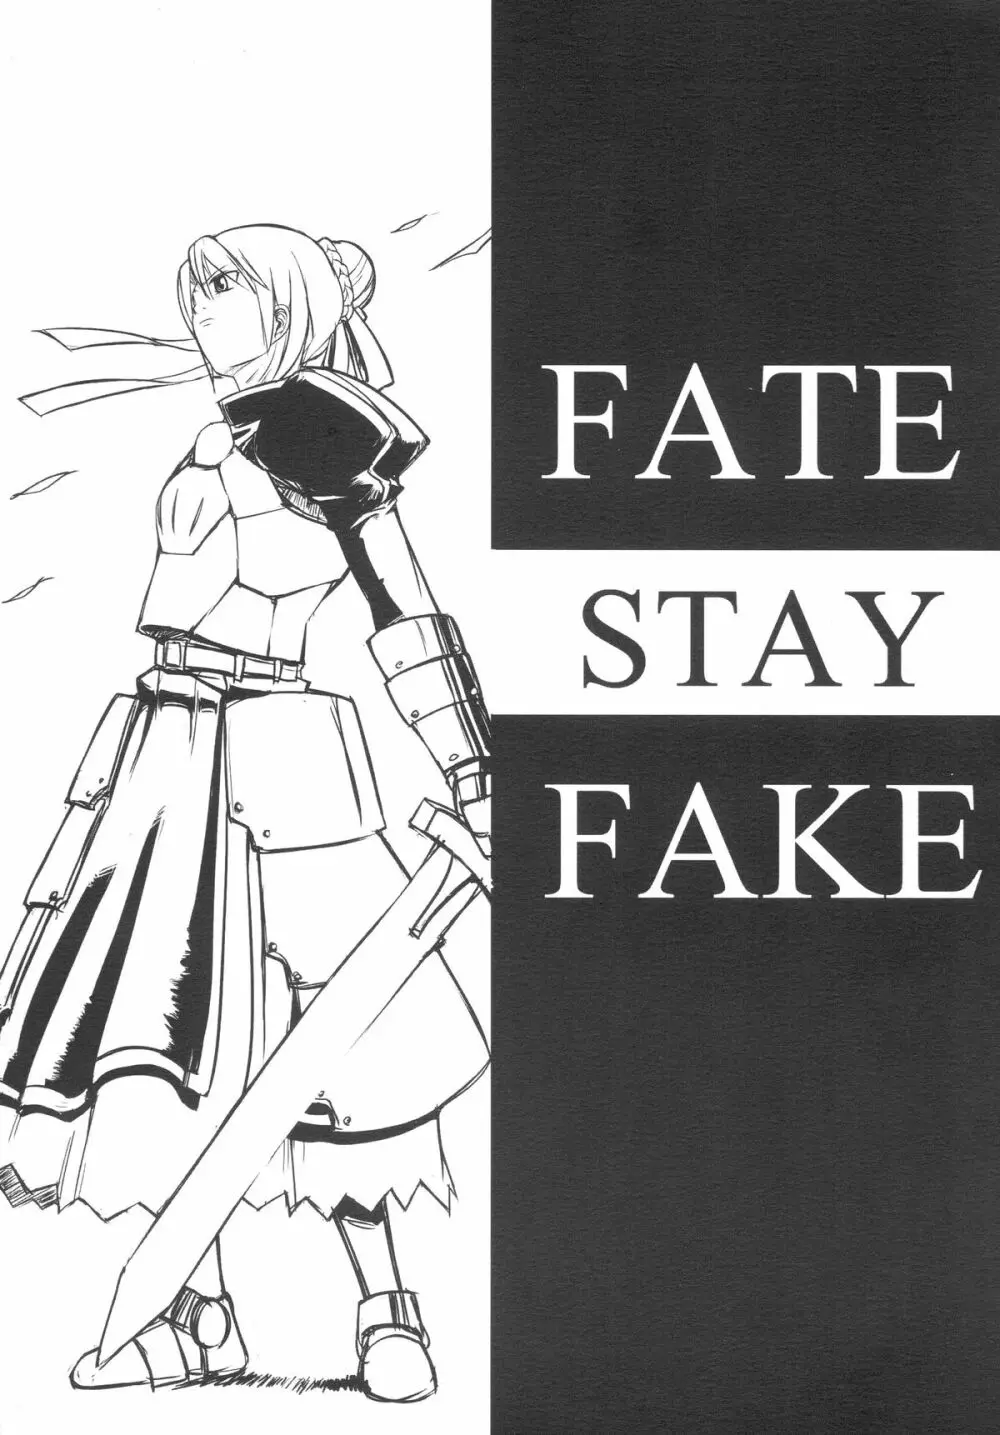 FATE STAY FAKE 31ページ